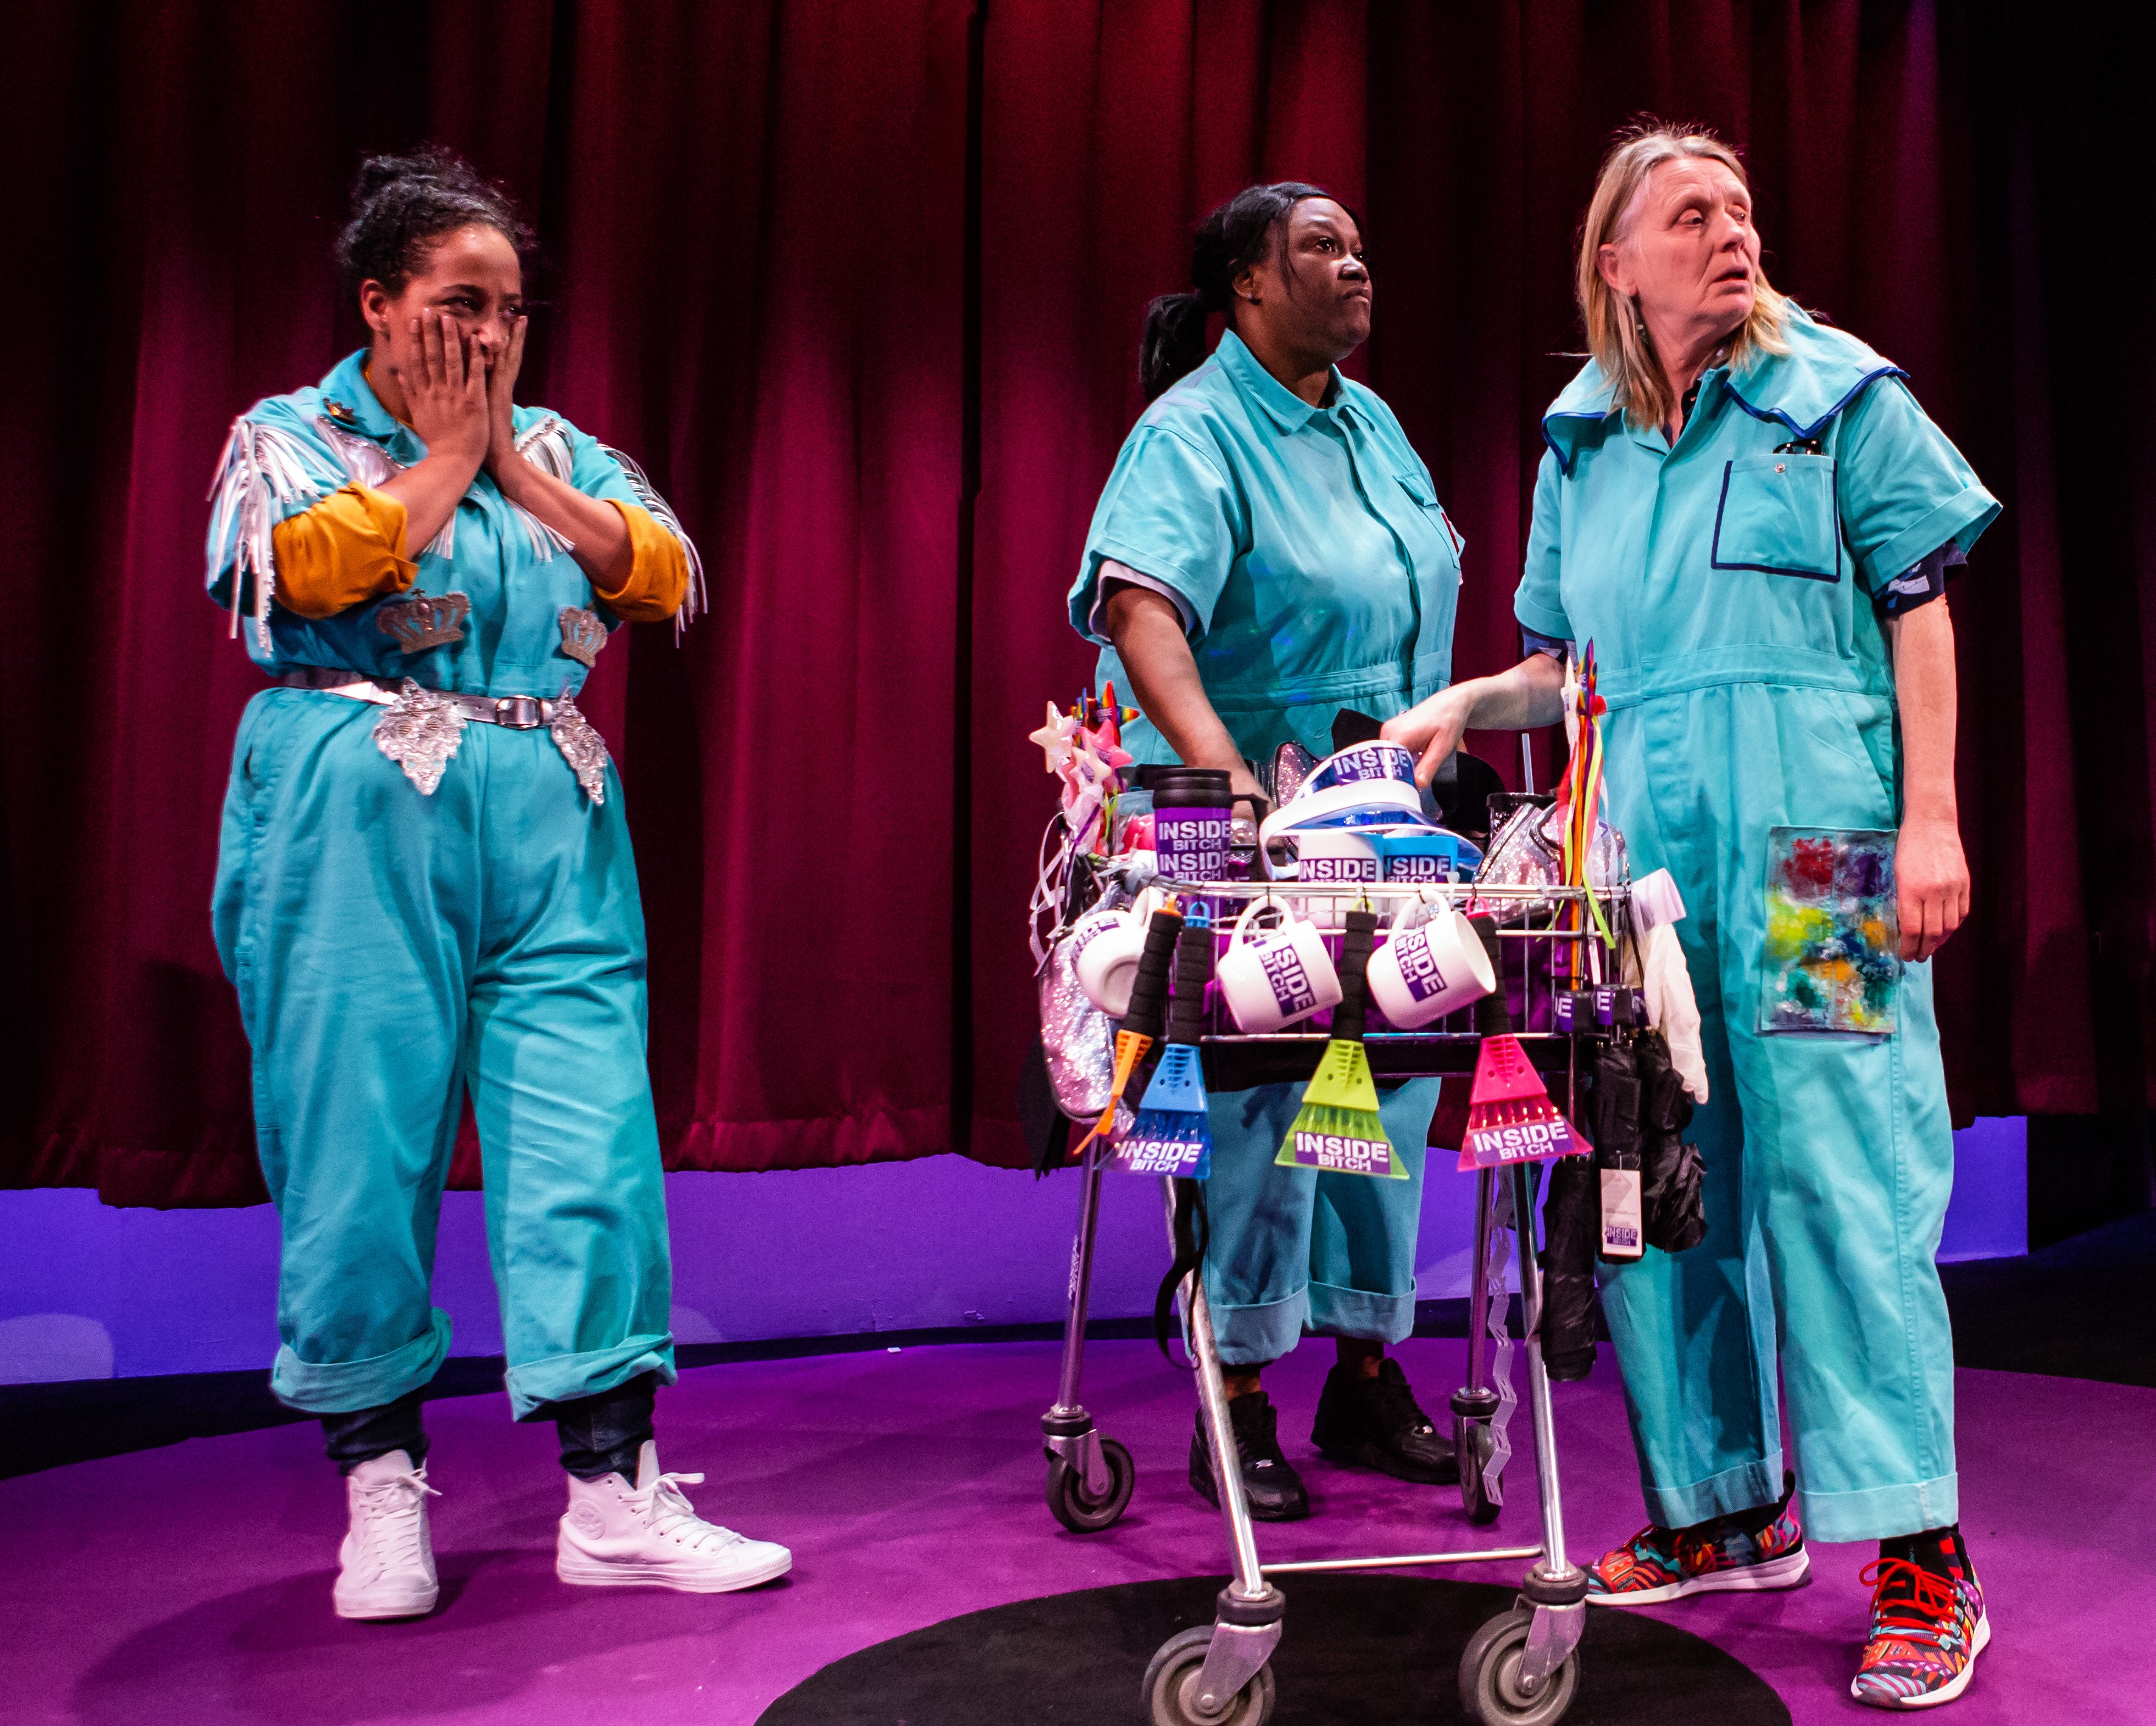 An image from Inside Bitch, three characters are on stage with a trolley full of 'Inside Bitch' merchandise,